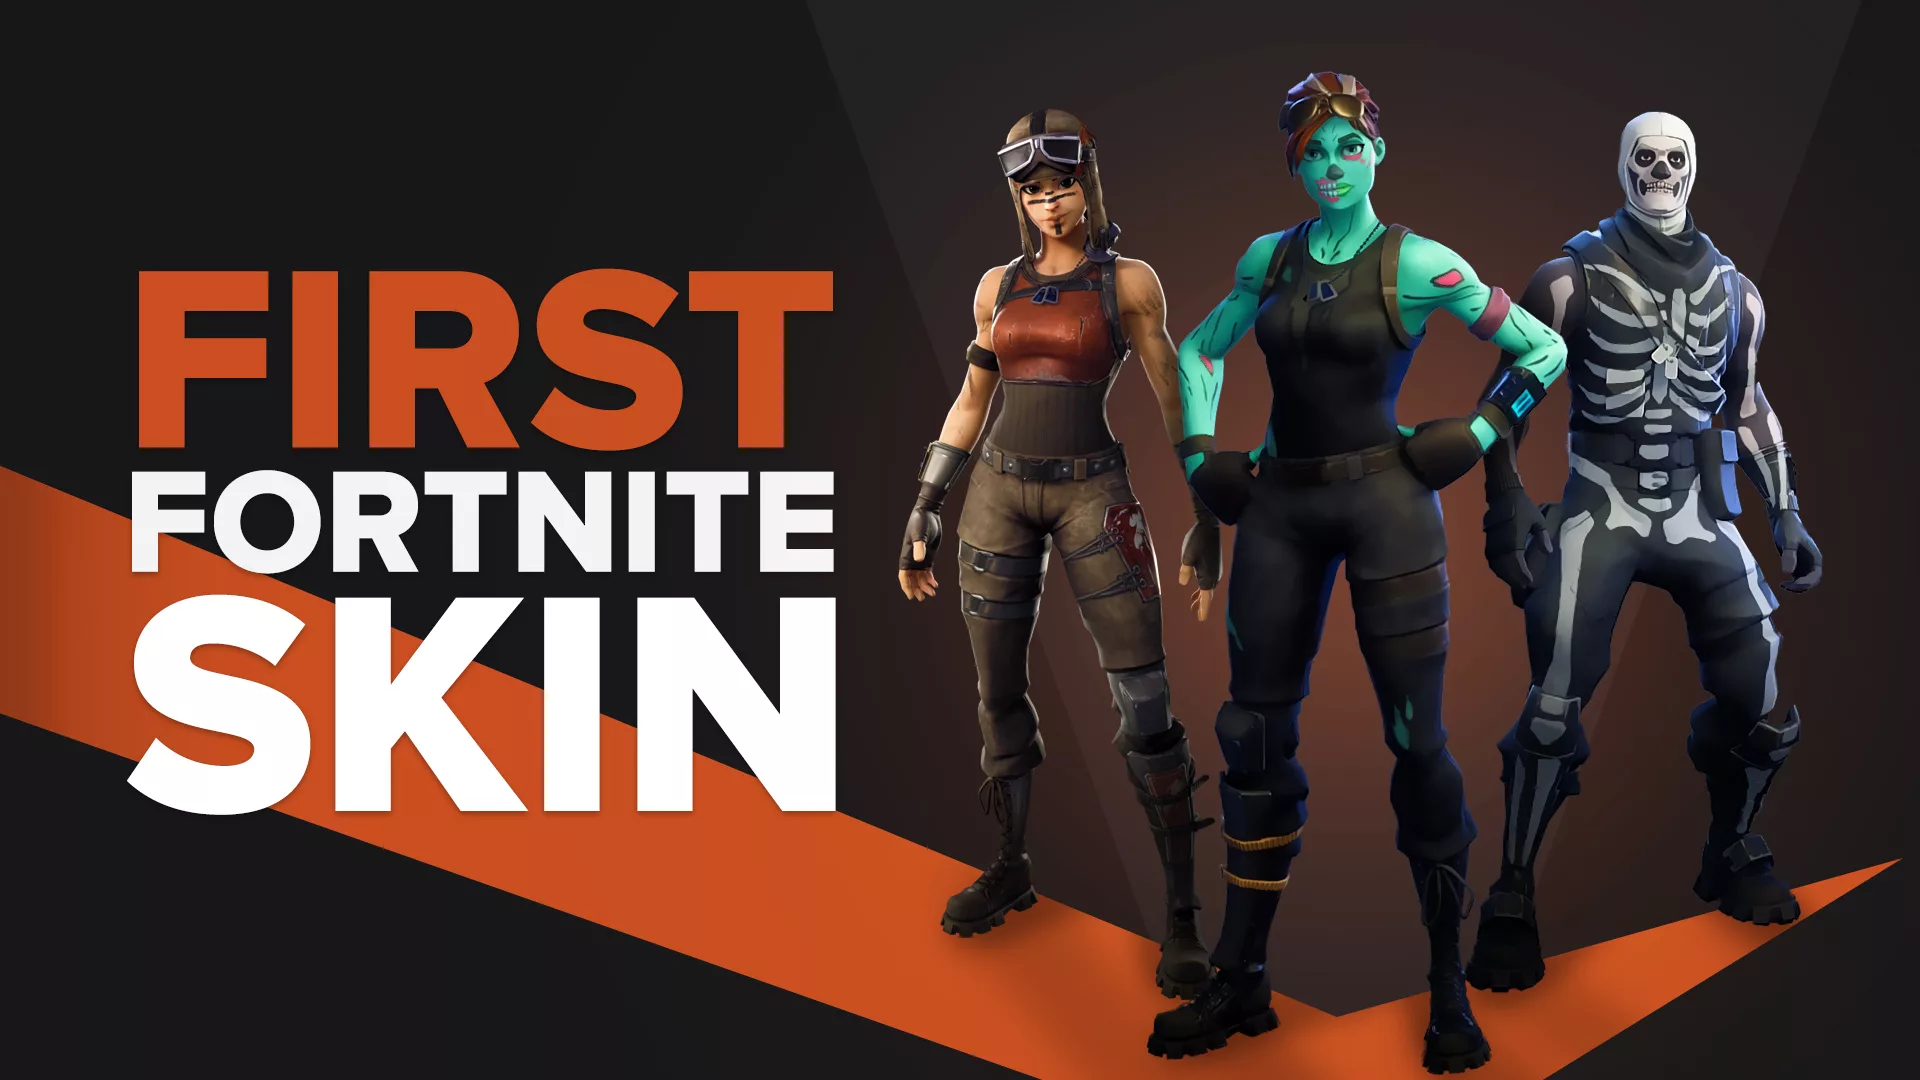 What the First Fortnite Skin Ever Released? | TGG